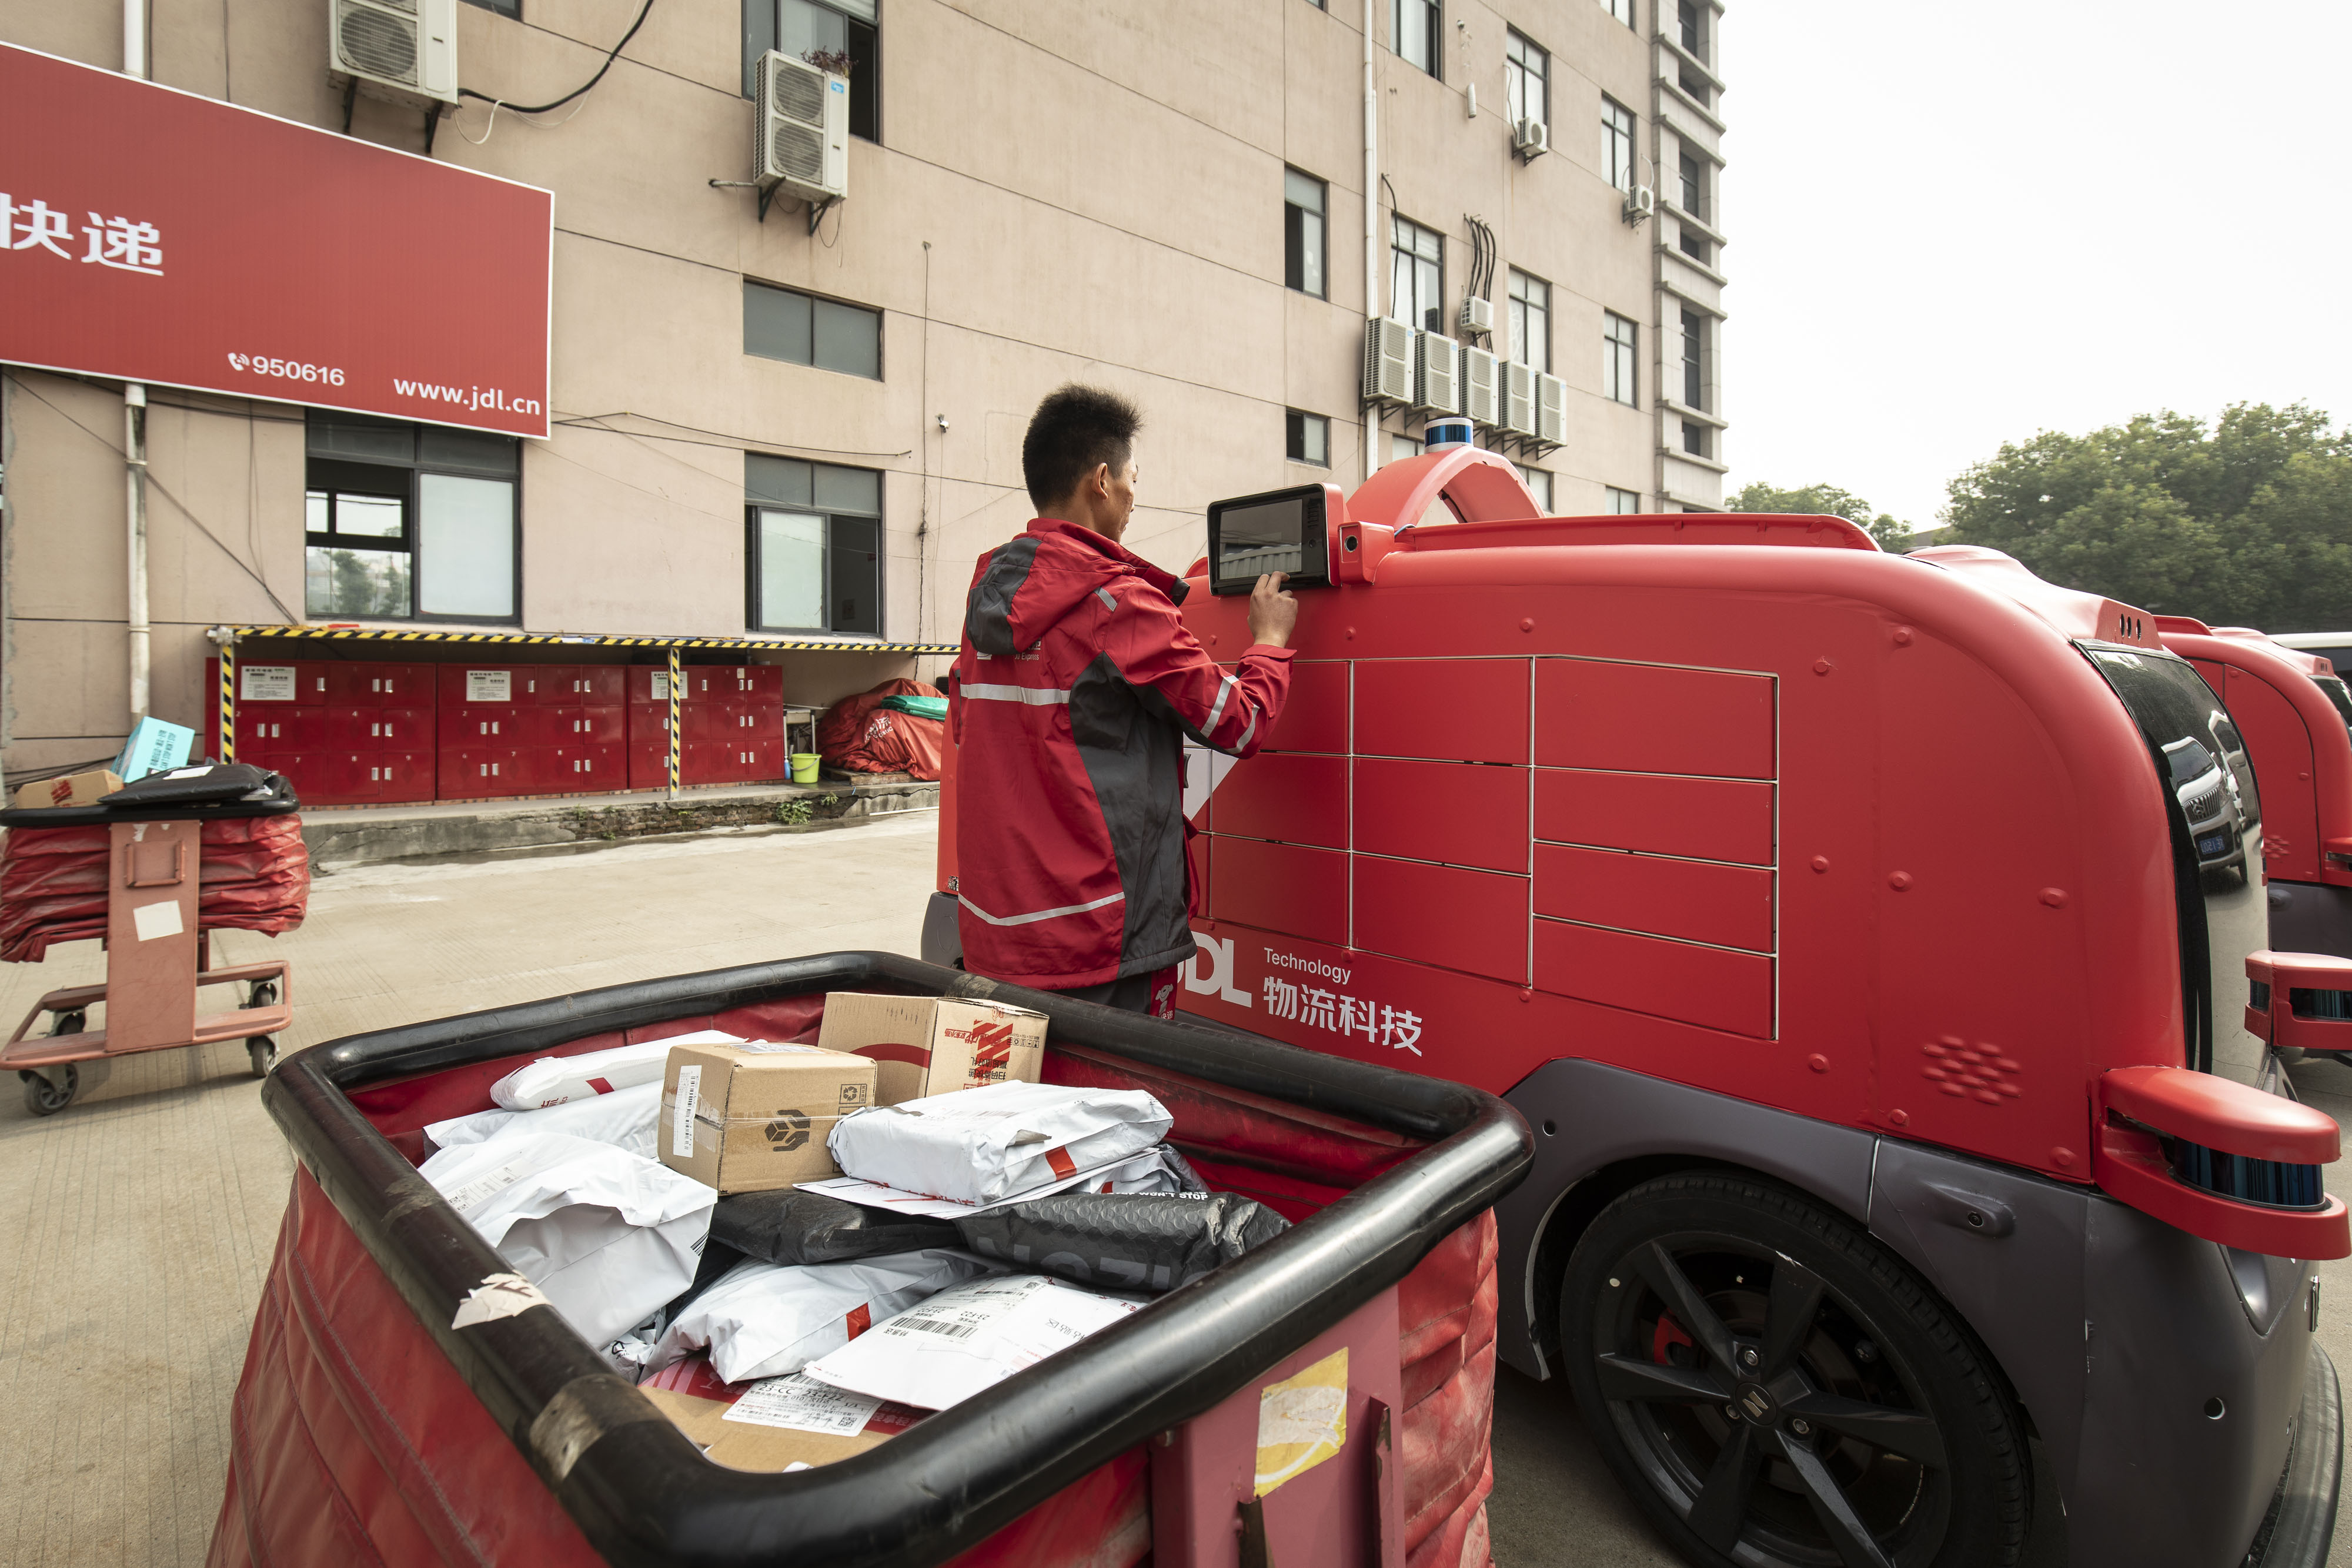 A driver for JD.com Inc.'s Luxury Express delivery service opens